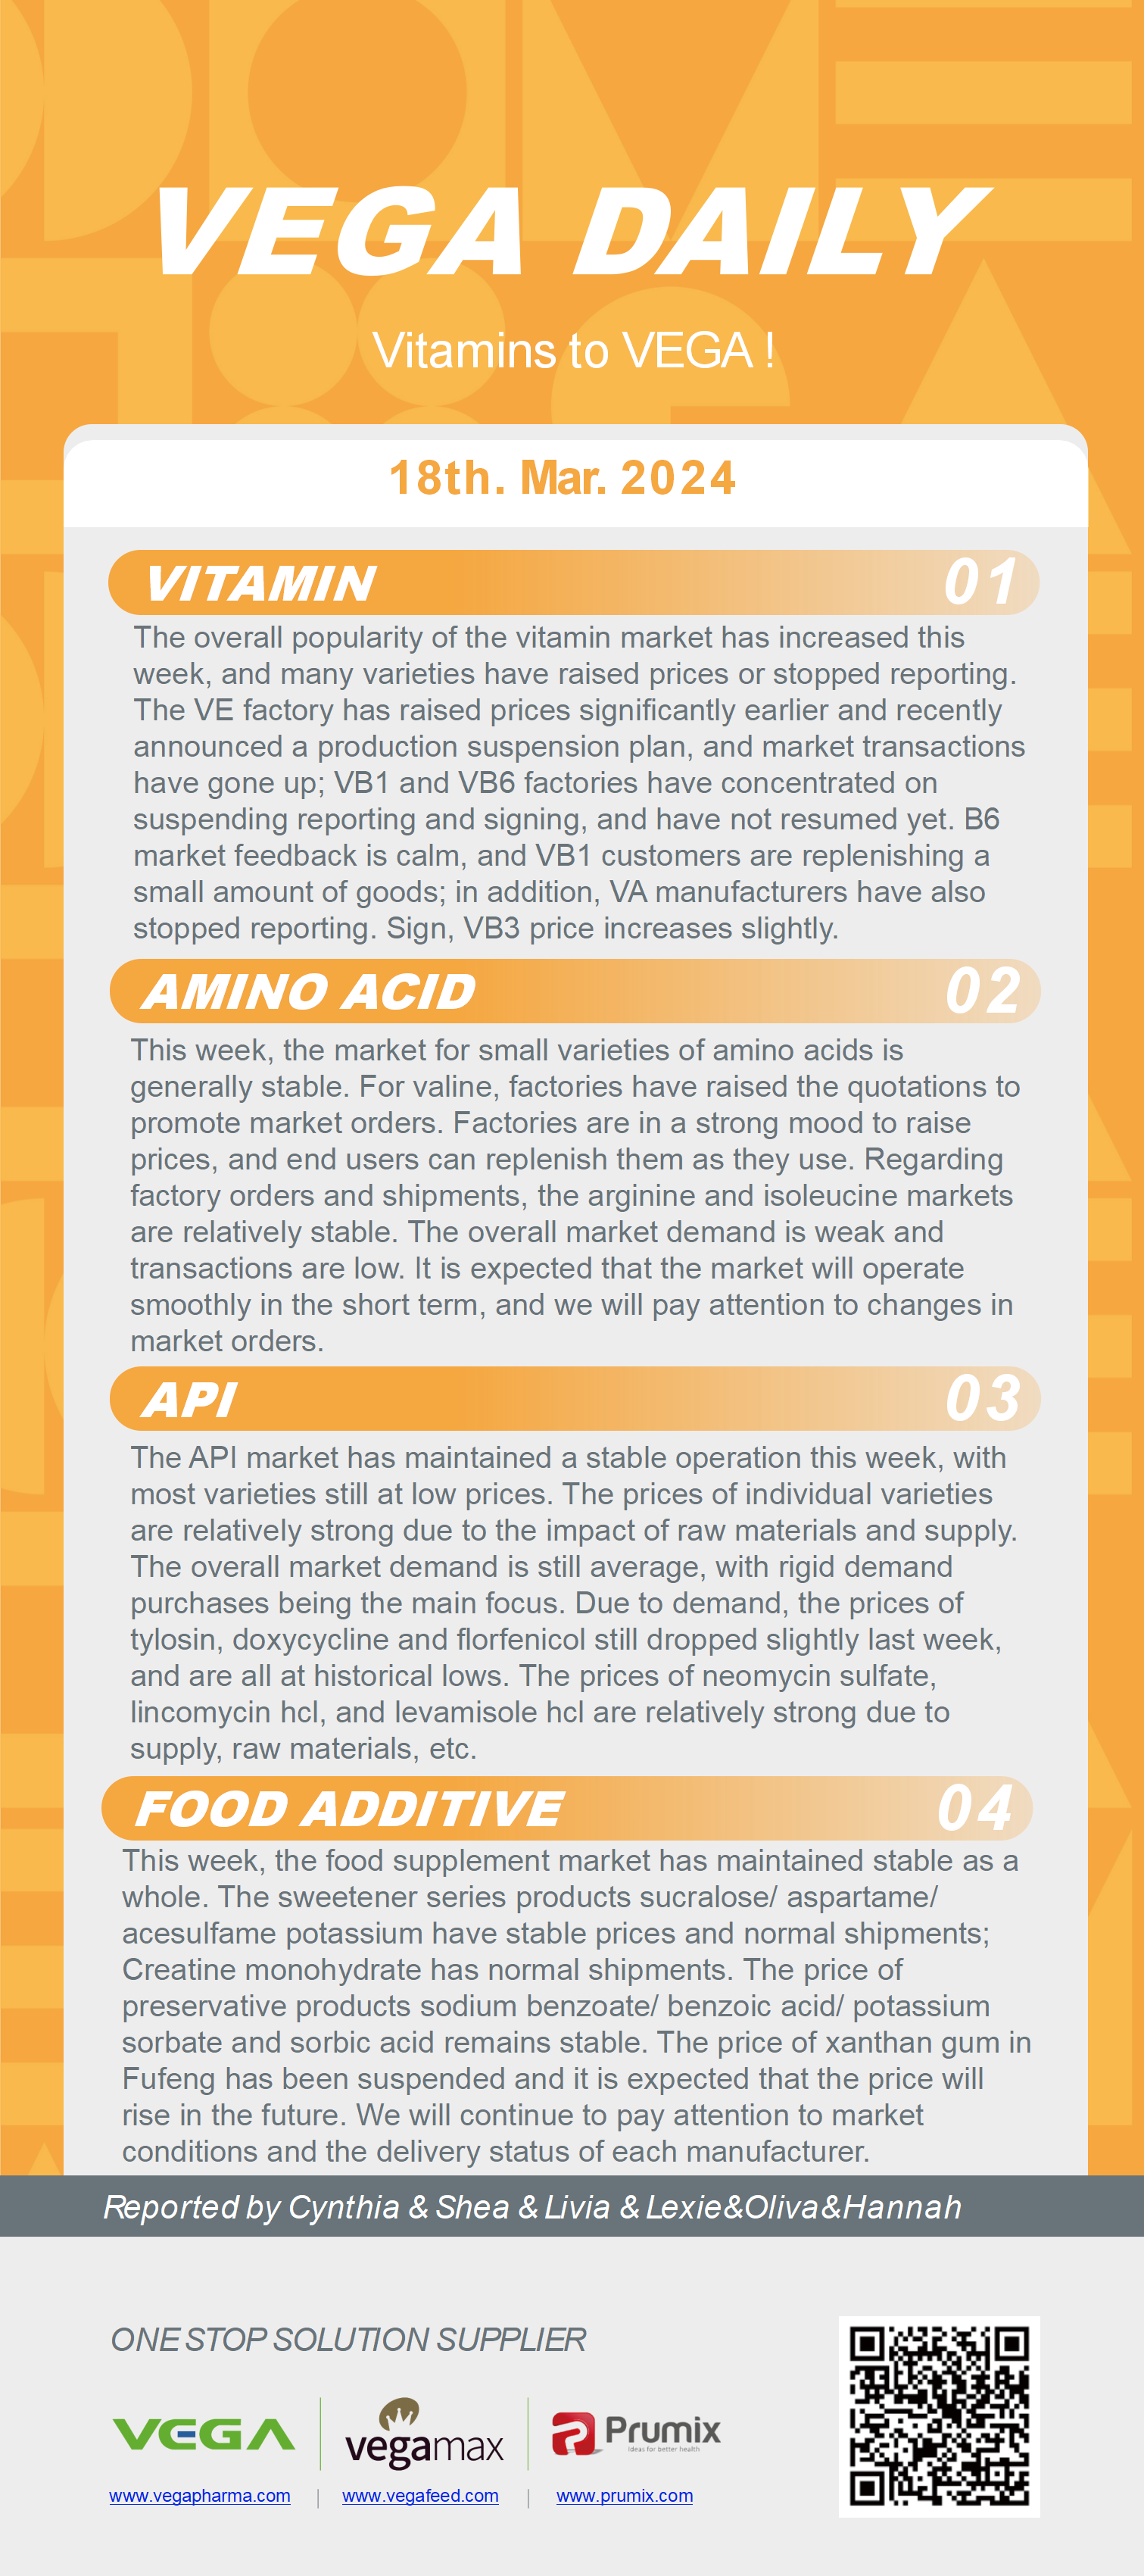 Vega Daily Dated on Mar 18th 2024 Vitamin Amino Acid APl Food Additives.png